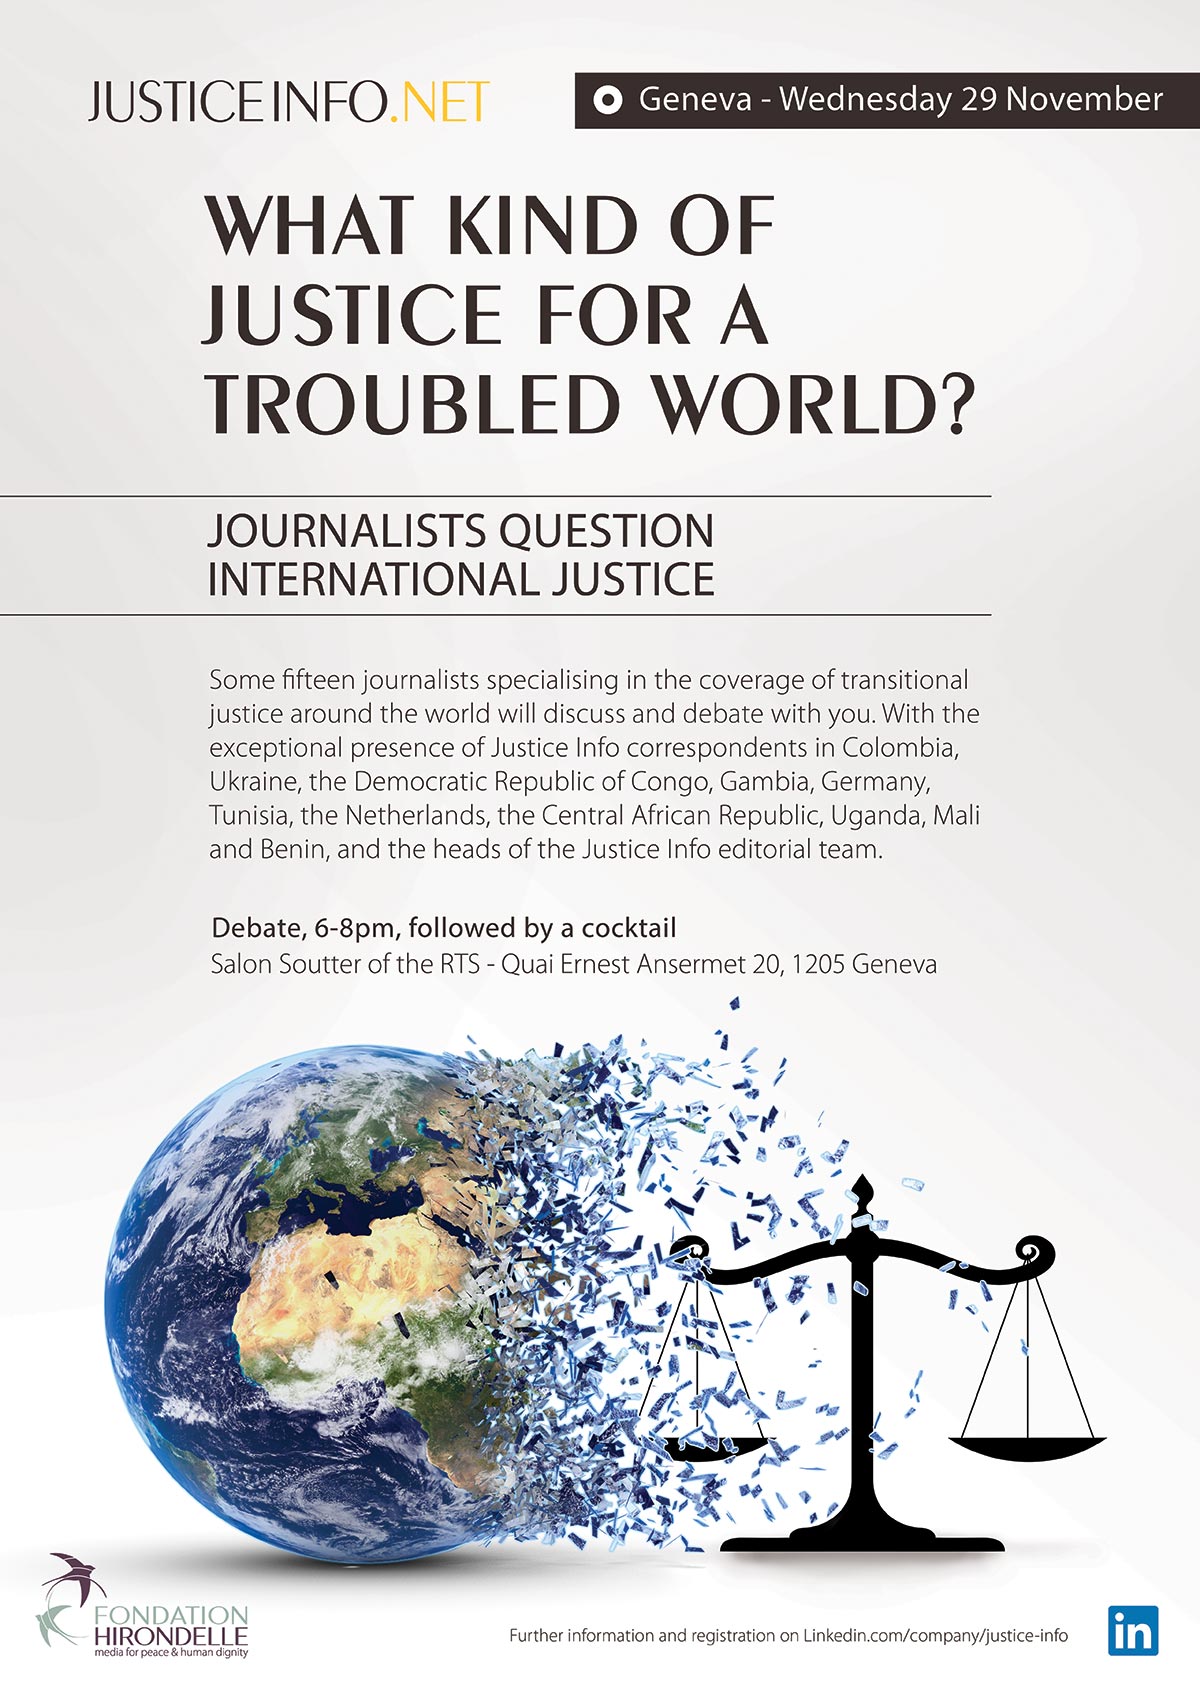 What kind of justice for a troubled world?